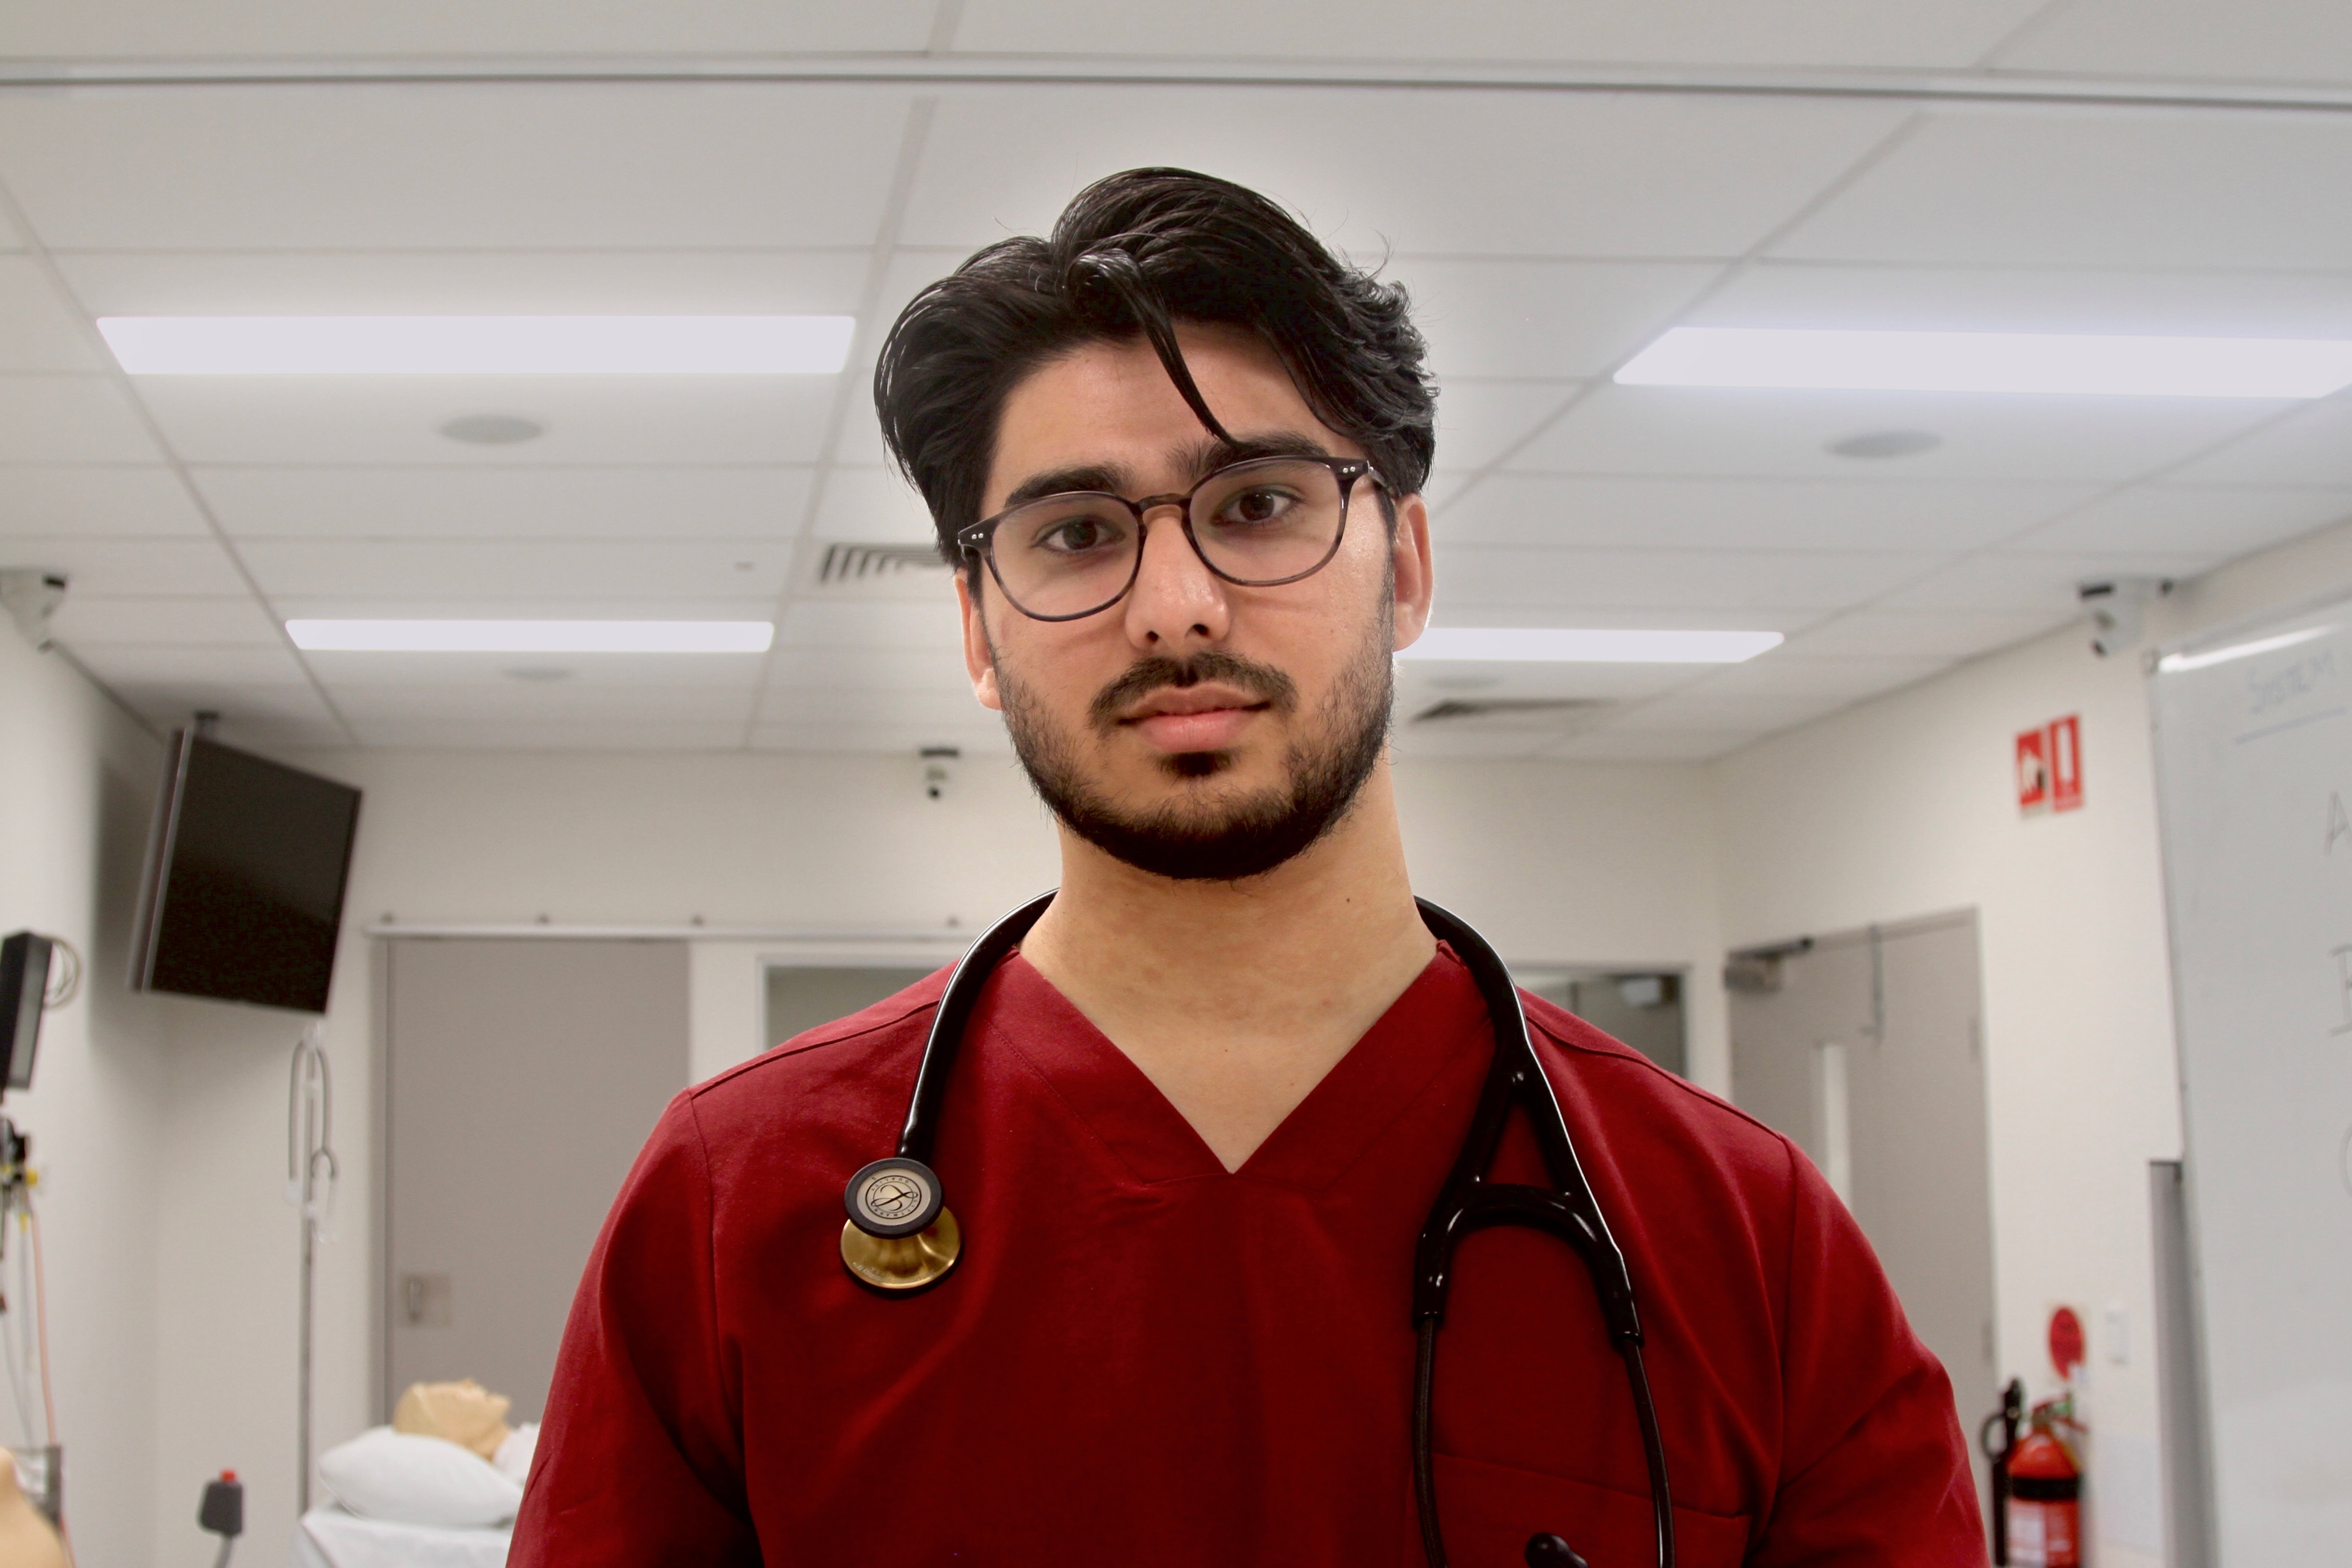 An aspiring doctor from the ’burbs takes on medical schools for elitism